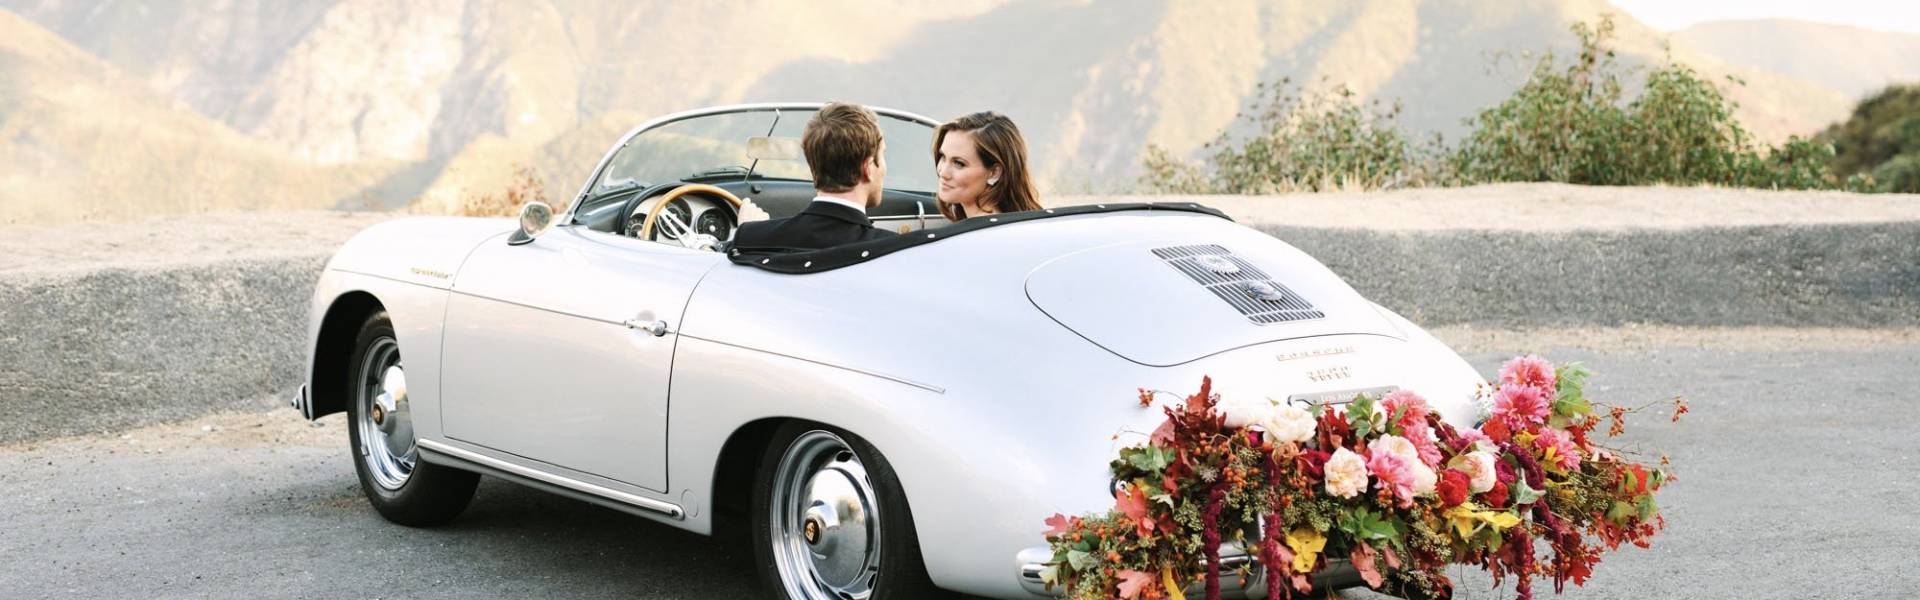 Wedding Car Hire, Wedding Cars & Vehicles For Hire Near You